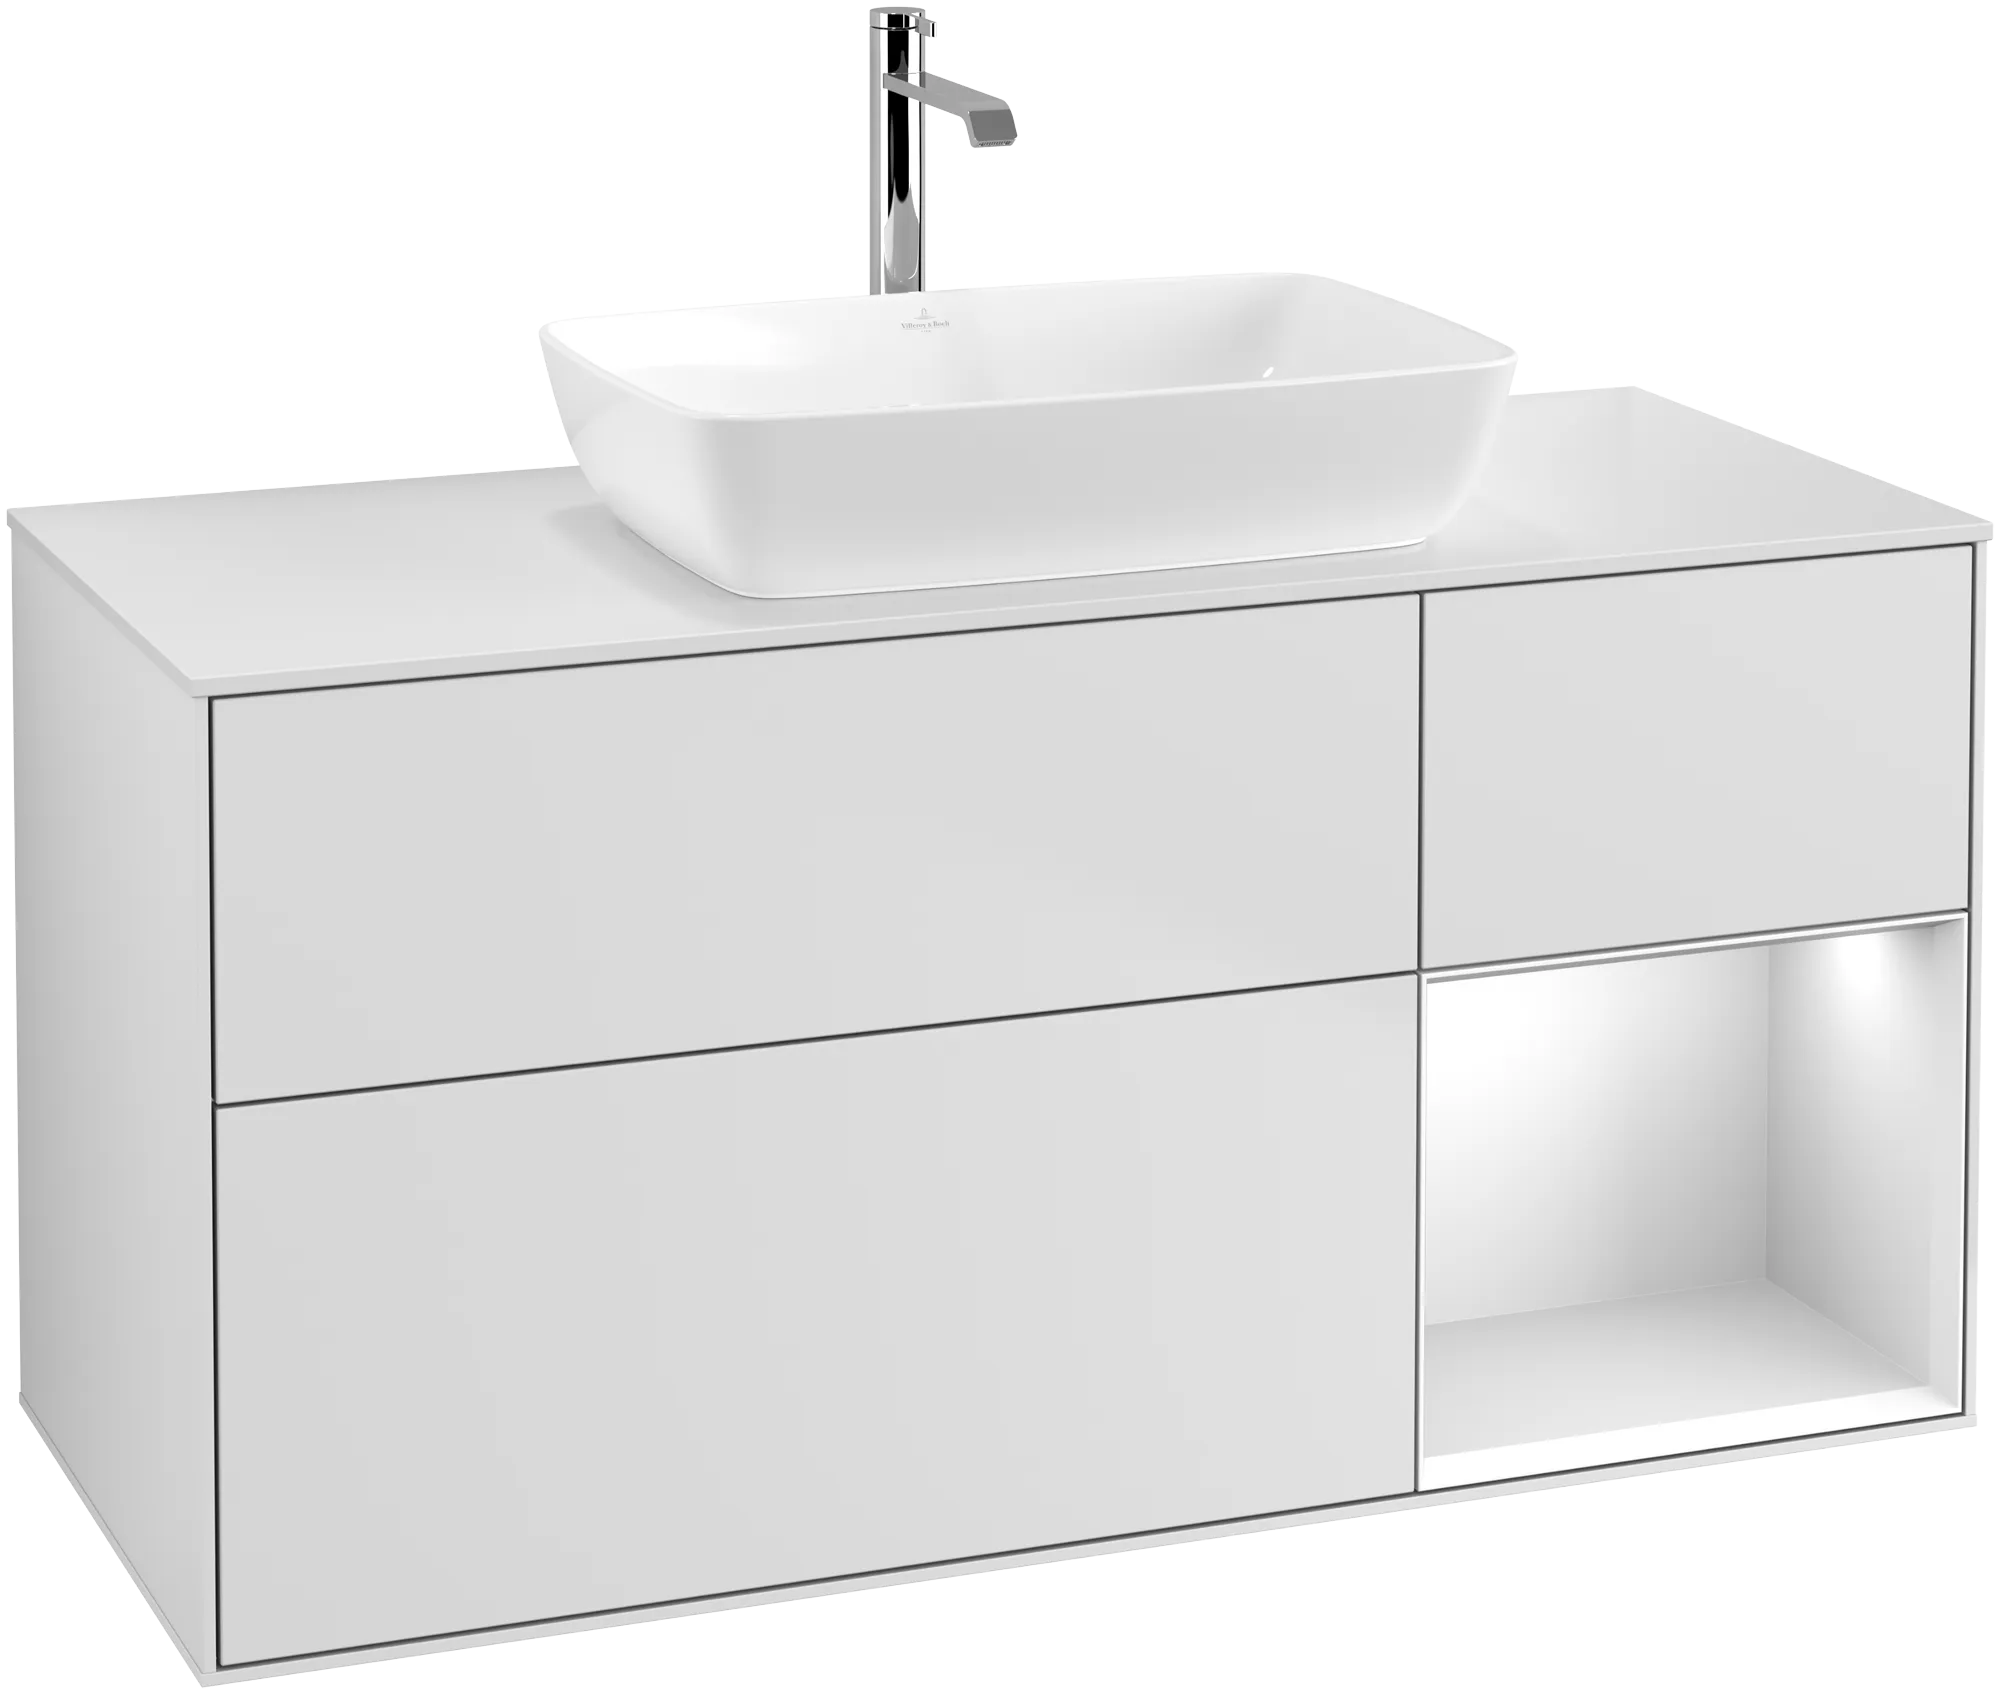 Obrázek VILLEROY BOCH Finion Vanity unit, with lighting, 3 pull-out compartments, 1200 x 603 x 501 mm, White Matt Lacquer / White Matt Lacquer / Glass White Matt #G831MTMT